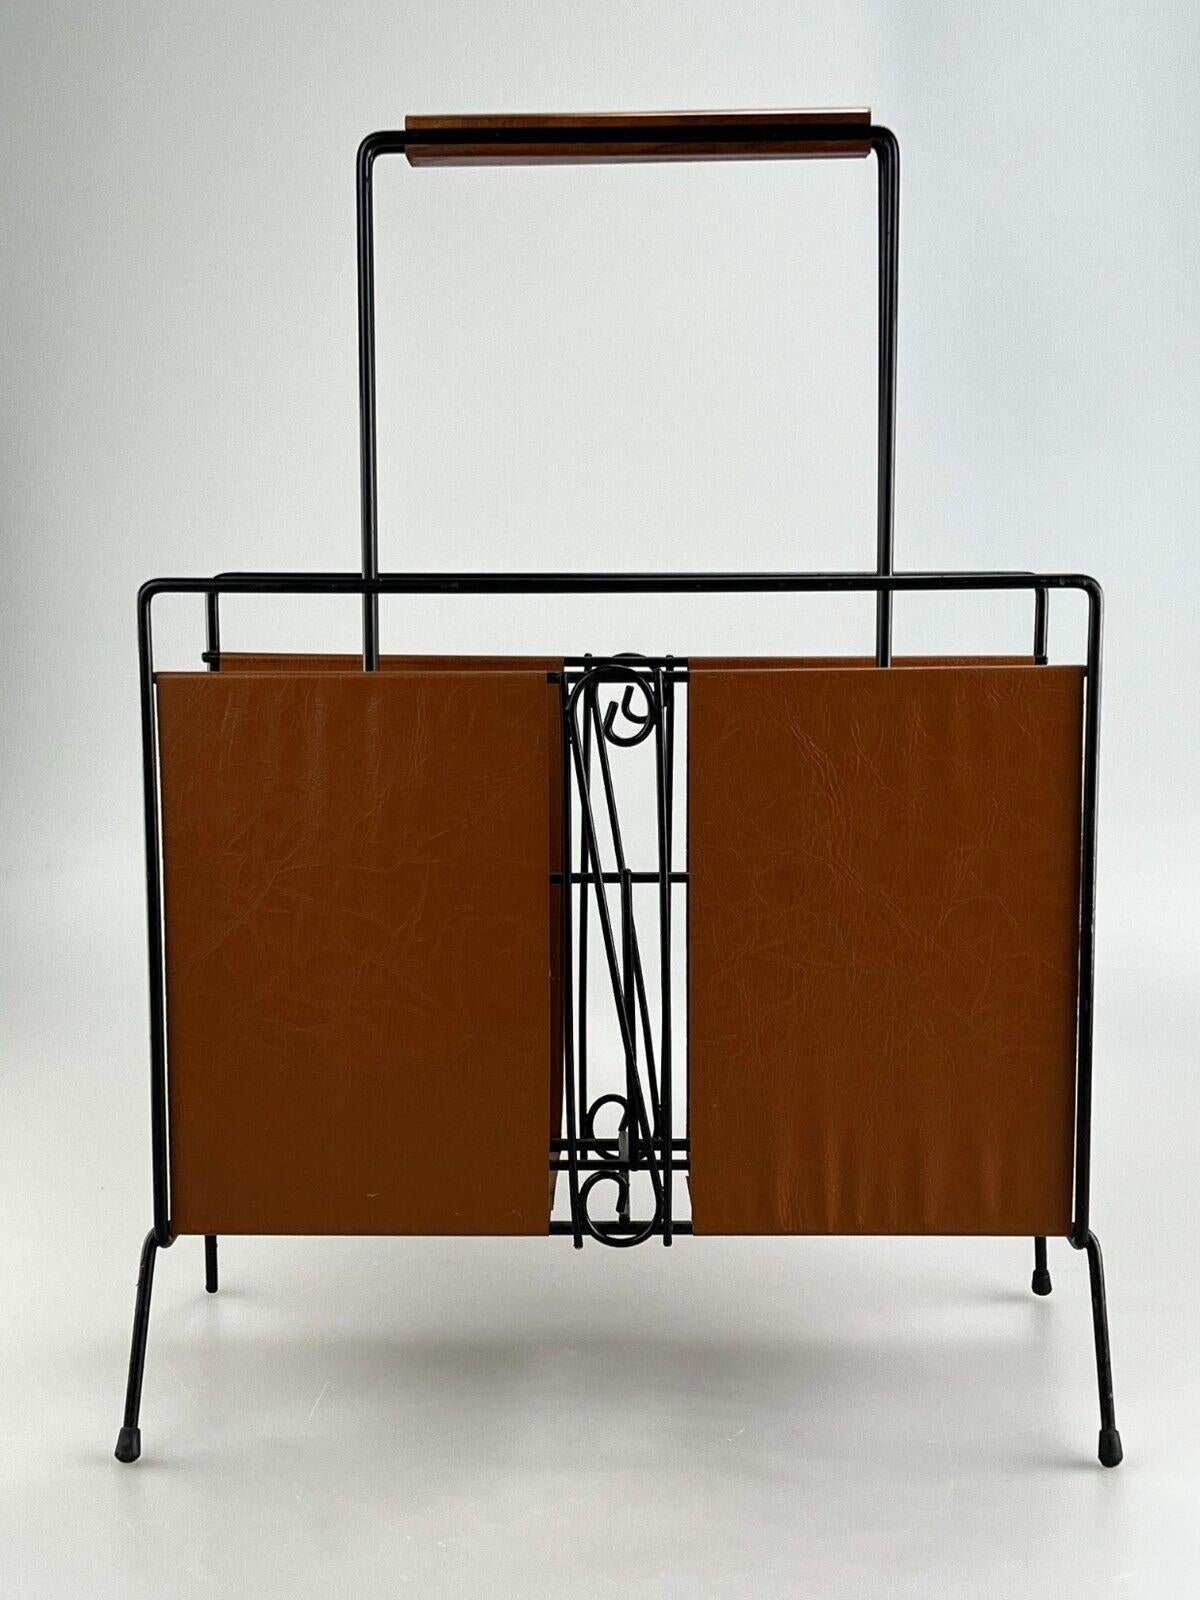 60's 70's Newspaper Holder Newspaper Rack Metal Teak Mid Century Design

Object: newspaper stand

Manufacturer:

Condition: good

Age: around 1960-1970

Dimensions:

36.5cm x 14cm x 51cm

Other notes:

The pictures serve as part of